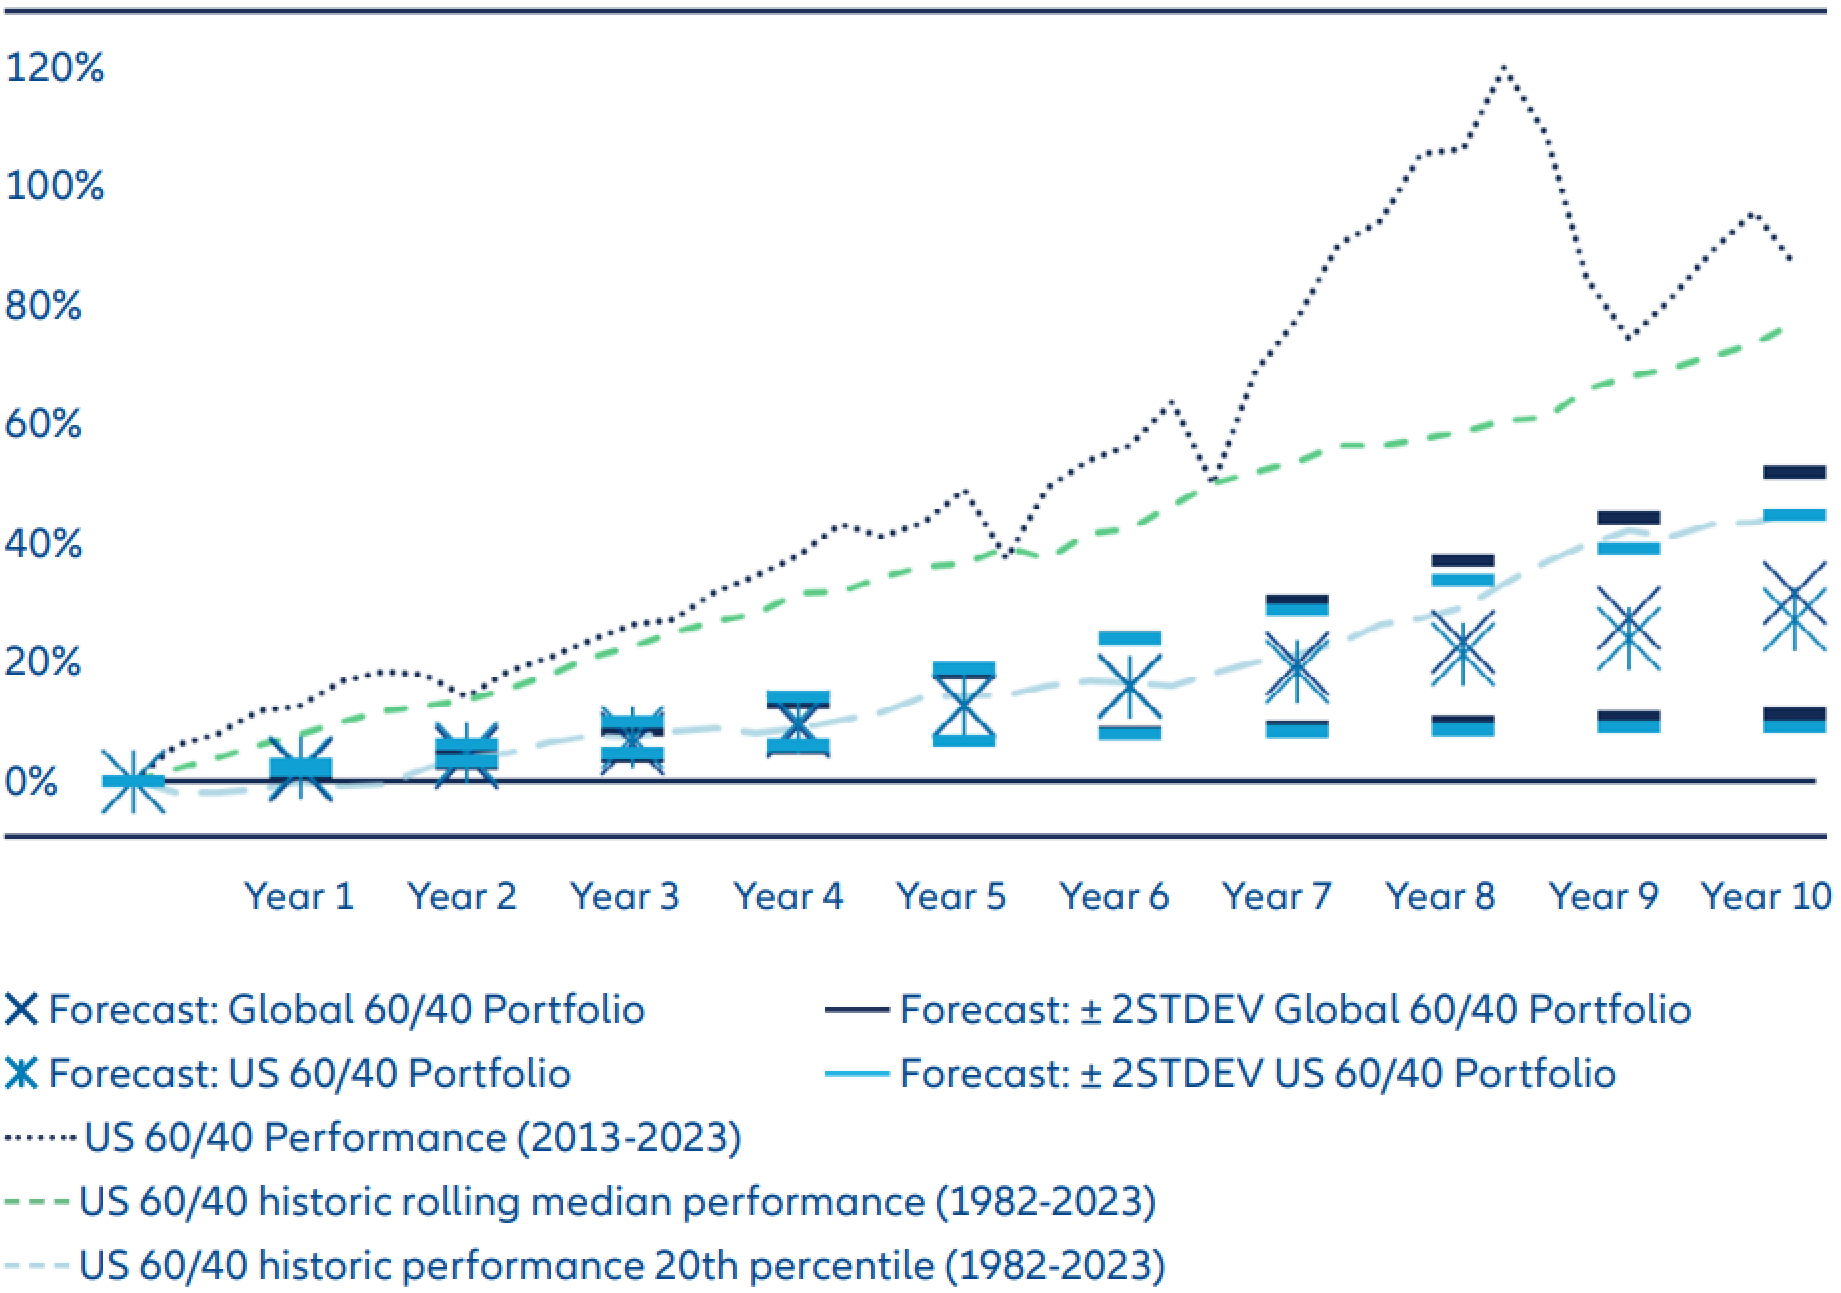 Exhibit 4: Simulation excess returns over USD cash for US centric and global 60:40 portfolios